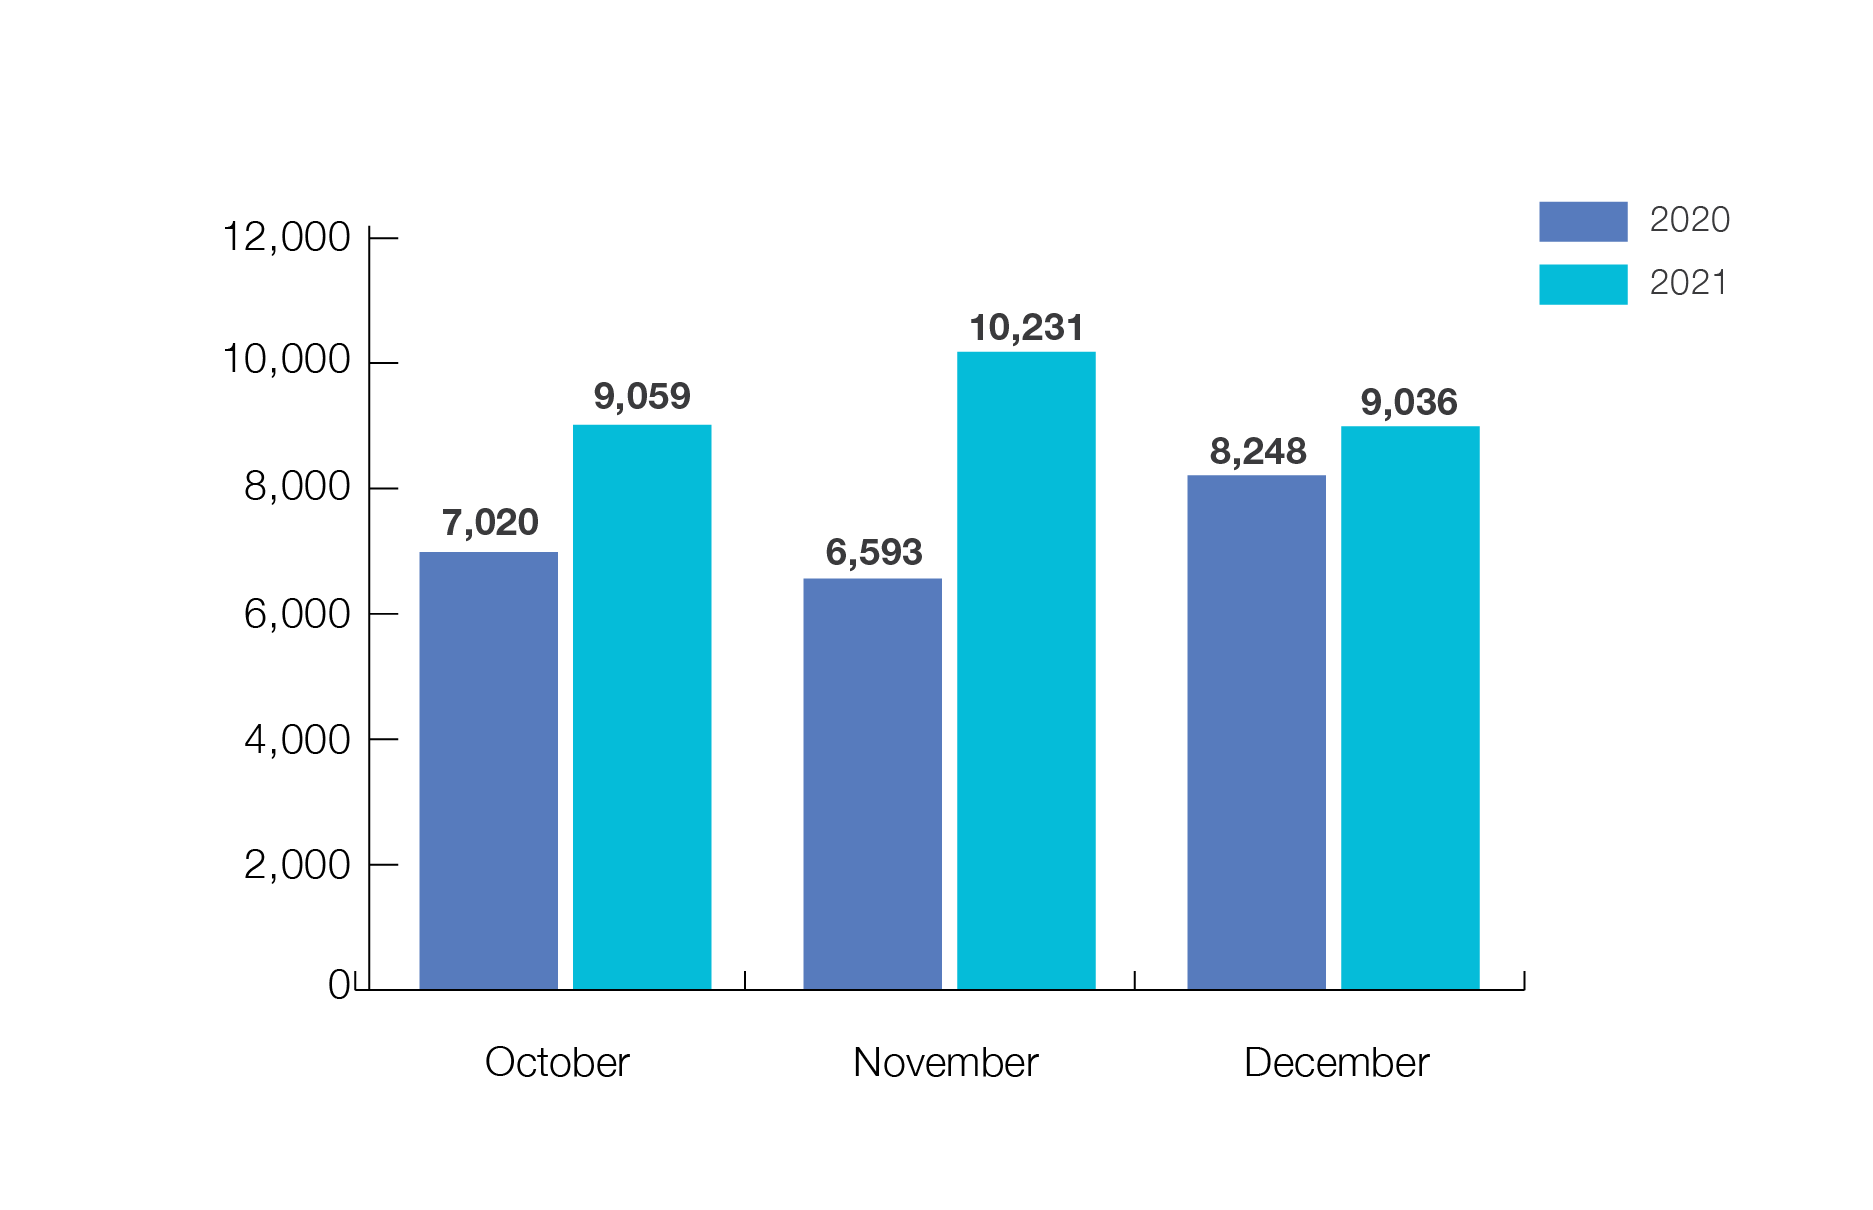 This graph shows that in October 2021 we had 9,059 completed eForms and in October 2020 we had 7,020. In November we had 10,231 eForms and in November 2020 we had 6,593. In December 2021 we had 9,036 and in December 2020 we had 8,248 eForms completed.